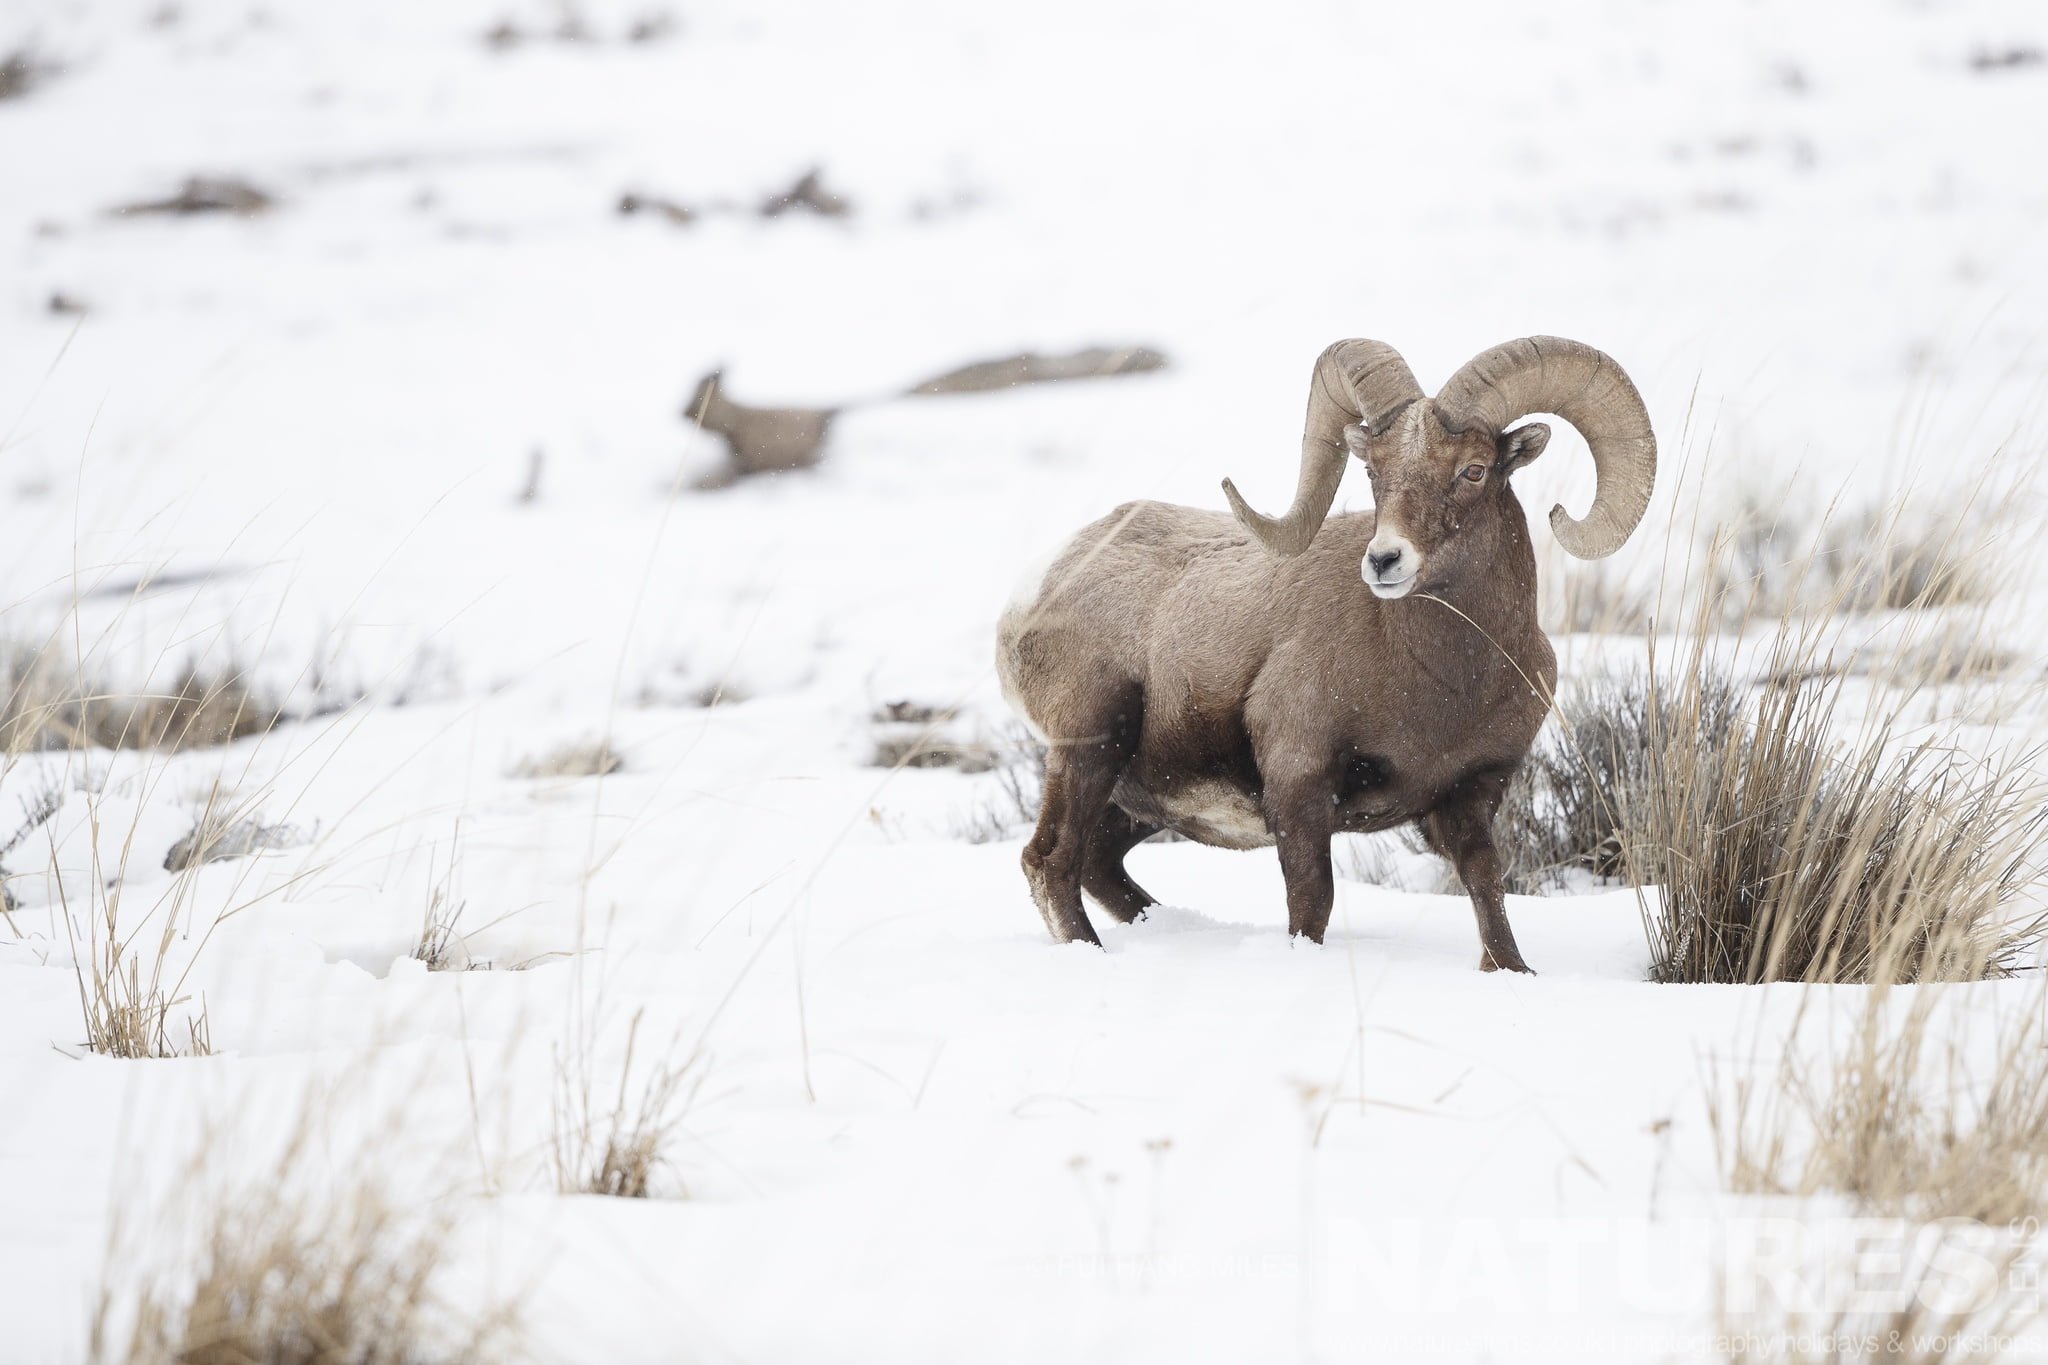 One Of Yellowstone'S Bighorn Sheep Walking Across The Snow Typical Of The Type Of Image That You Will Capture During The Wildlife Of Yellowstone In Winter Photography Holiday